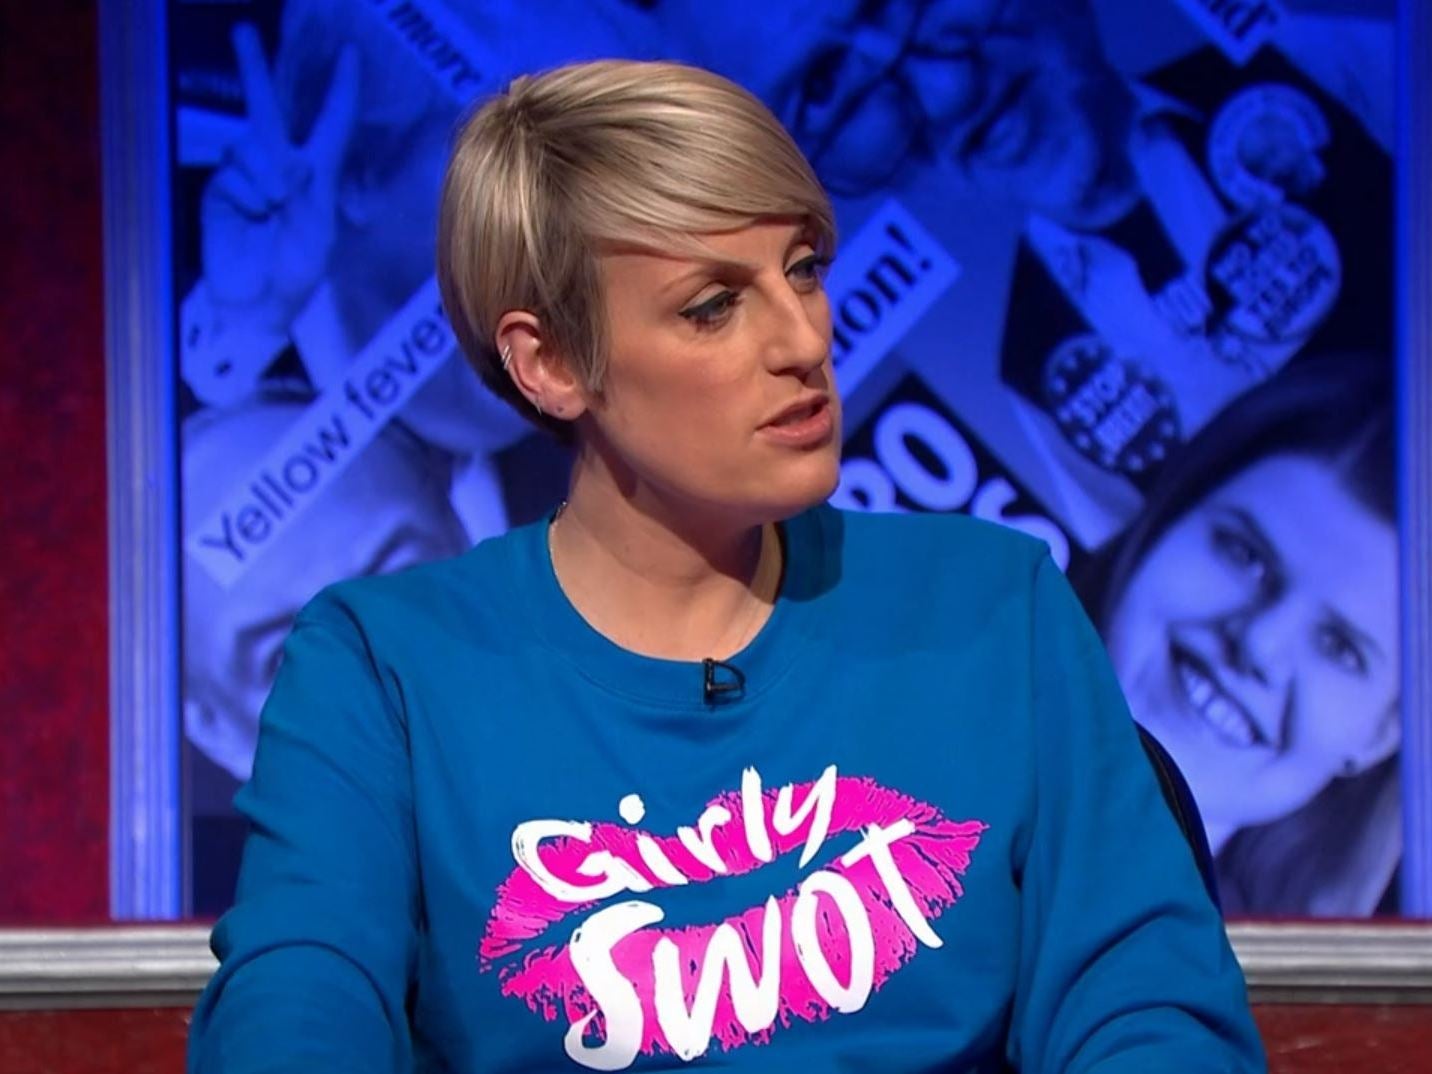 Steph McGovern reveals touching story behind her 'Girly Swot' jumper on Have I Got News For You